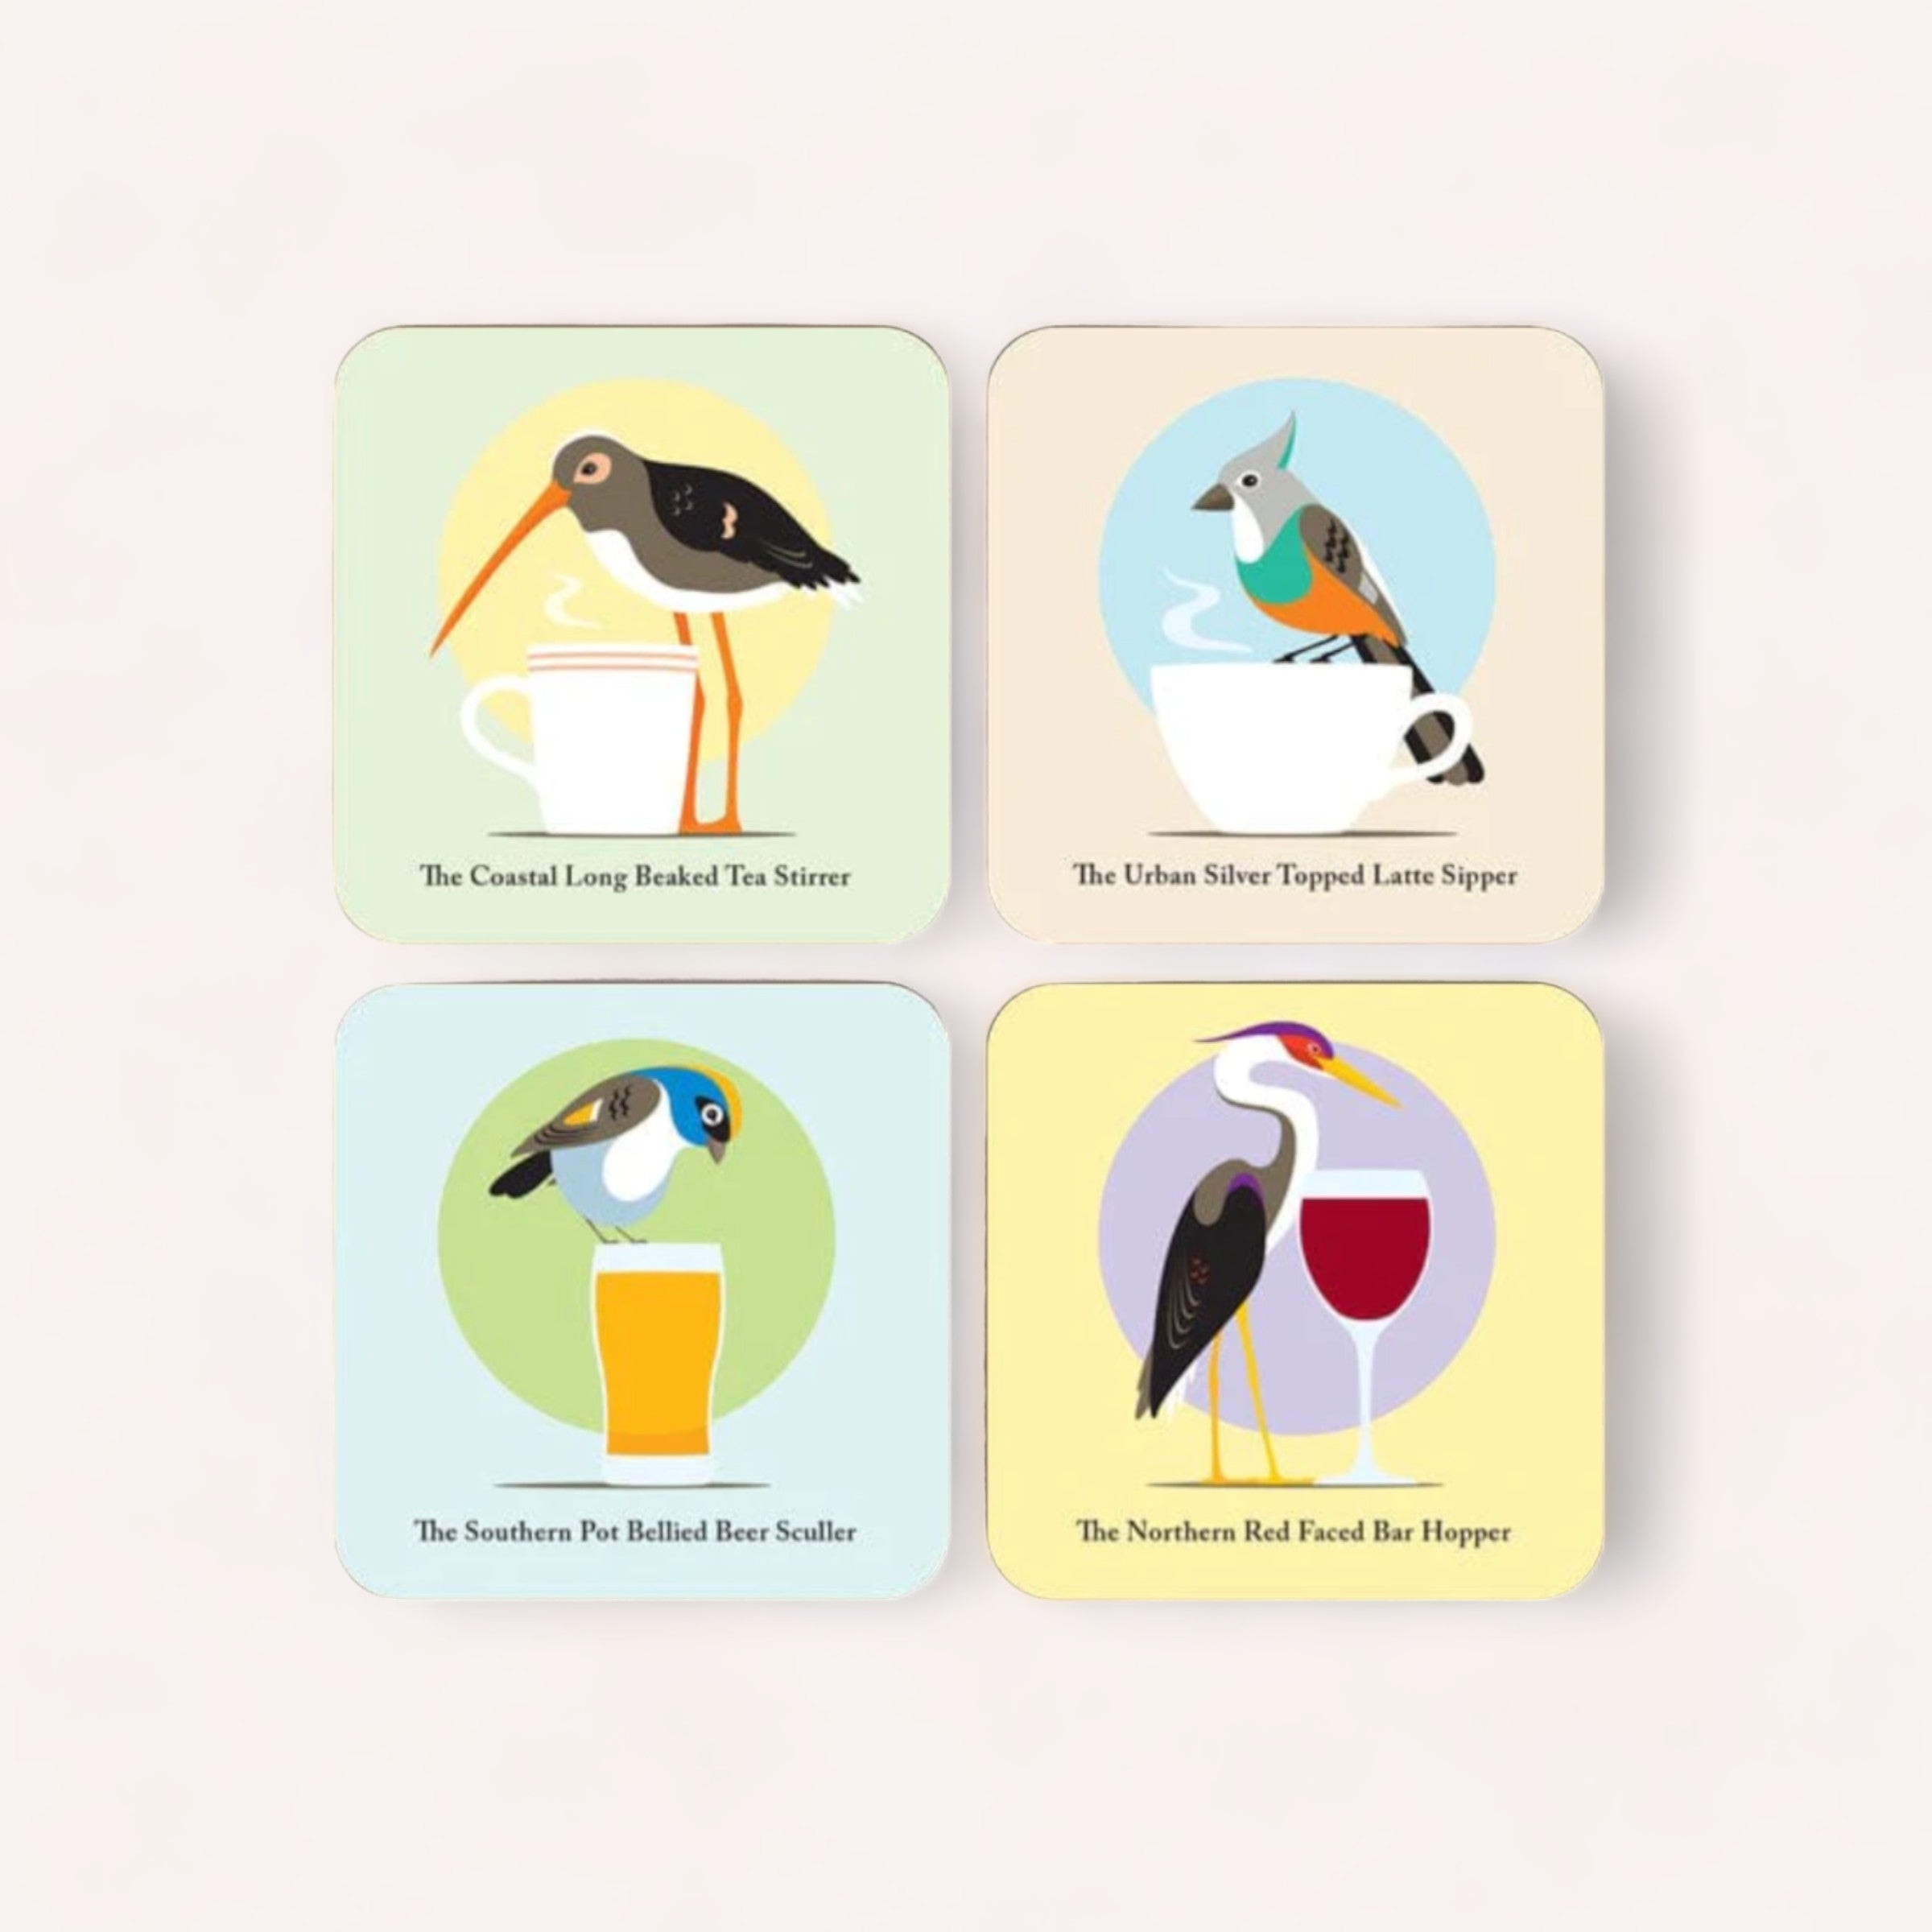 A whimsical set of Modern Natives Coaster Set by Glenn Jones art illustrations depicting birds with playful names based on drinking habits, each paired with a different beverage and beautifully showcased on hardboard coasters, a product of Glenn Jones Accessories.